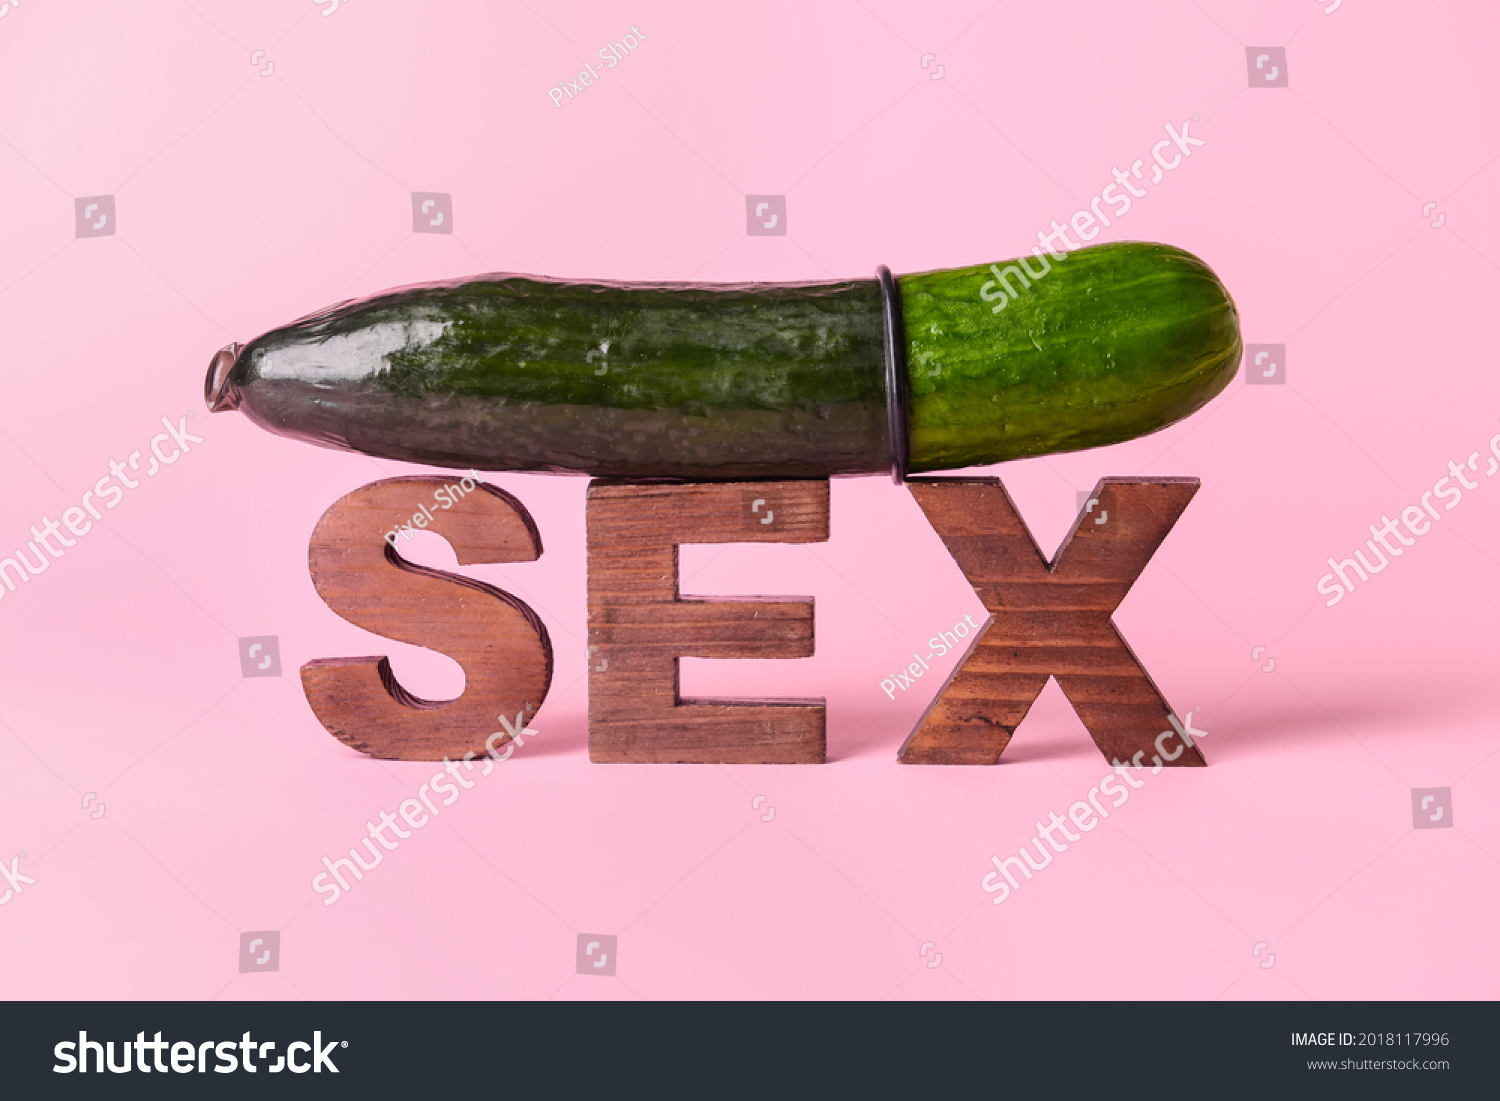 chris alsop recommends How To Have Sex With A Cucumber